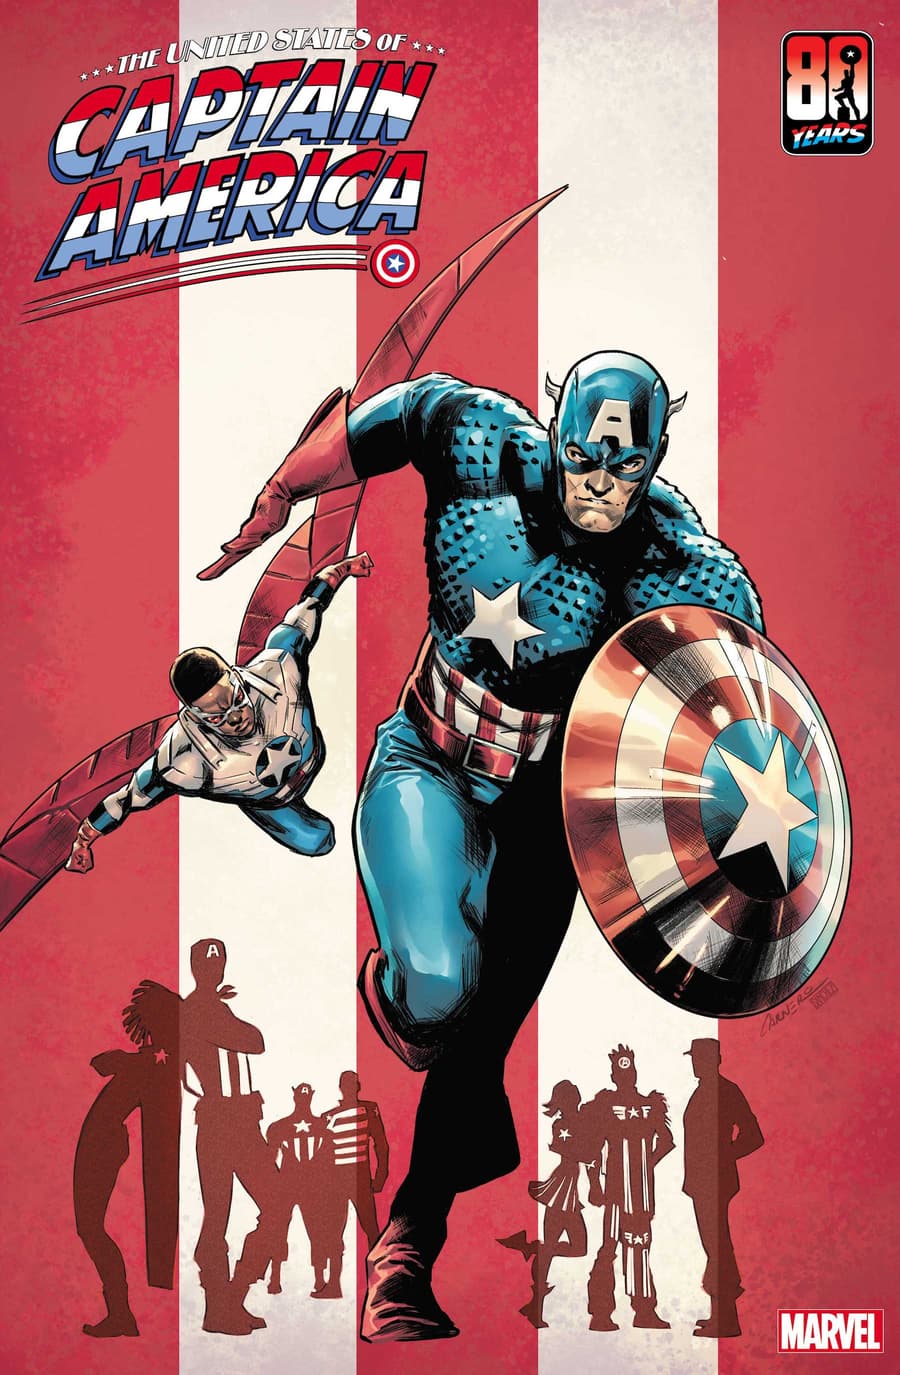 THE UNITED STATES OF CAPTAIN AMERICA #1 variant cover by Carmen Carnero